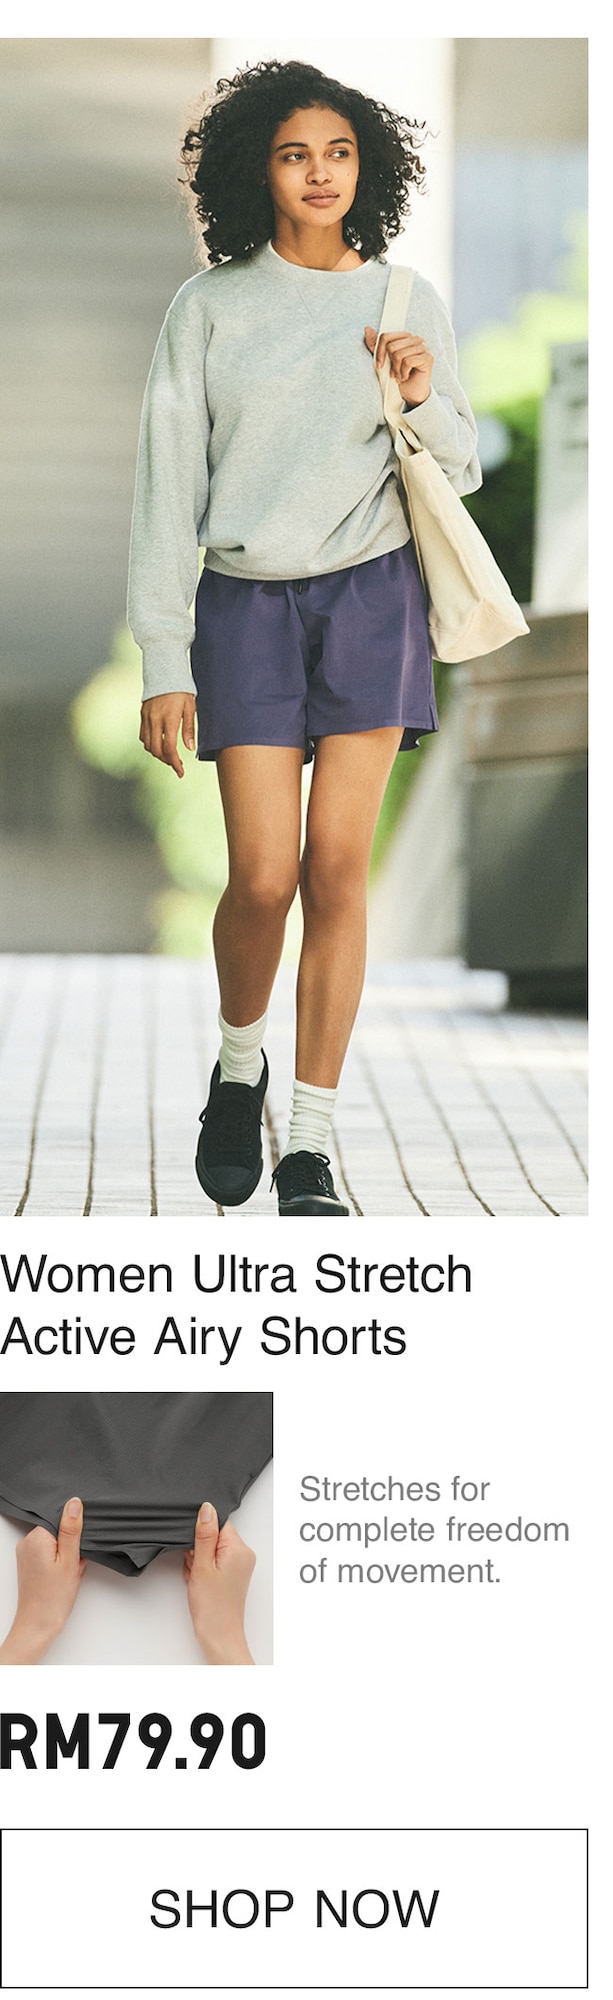 ULTRA STRETCH ACTIVE AIRY SHORTS